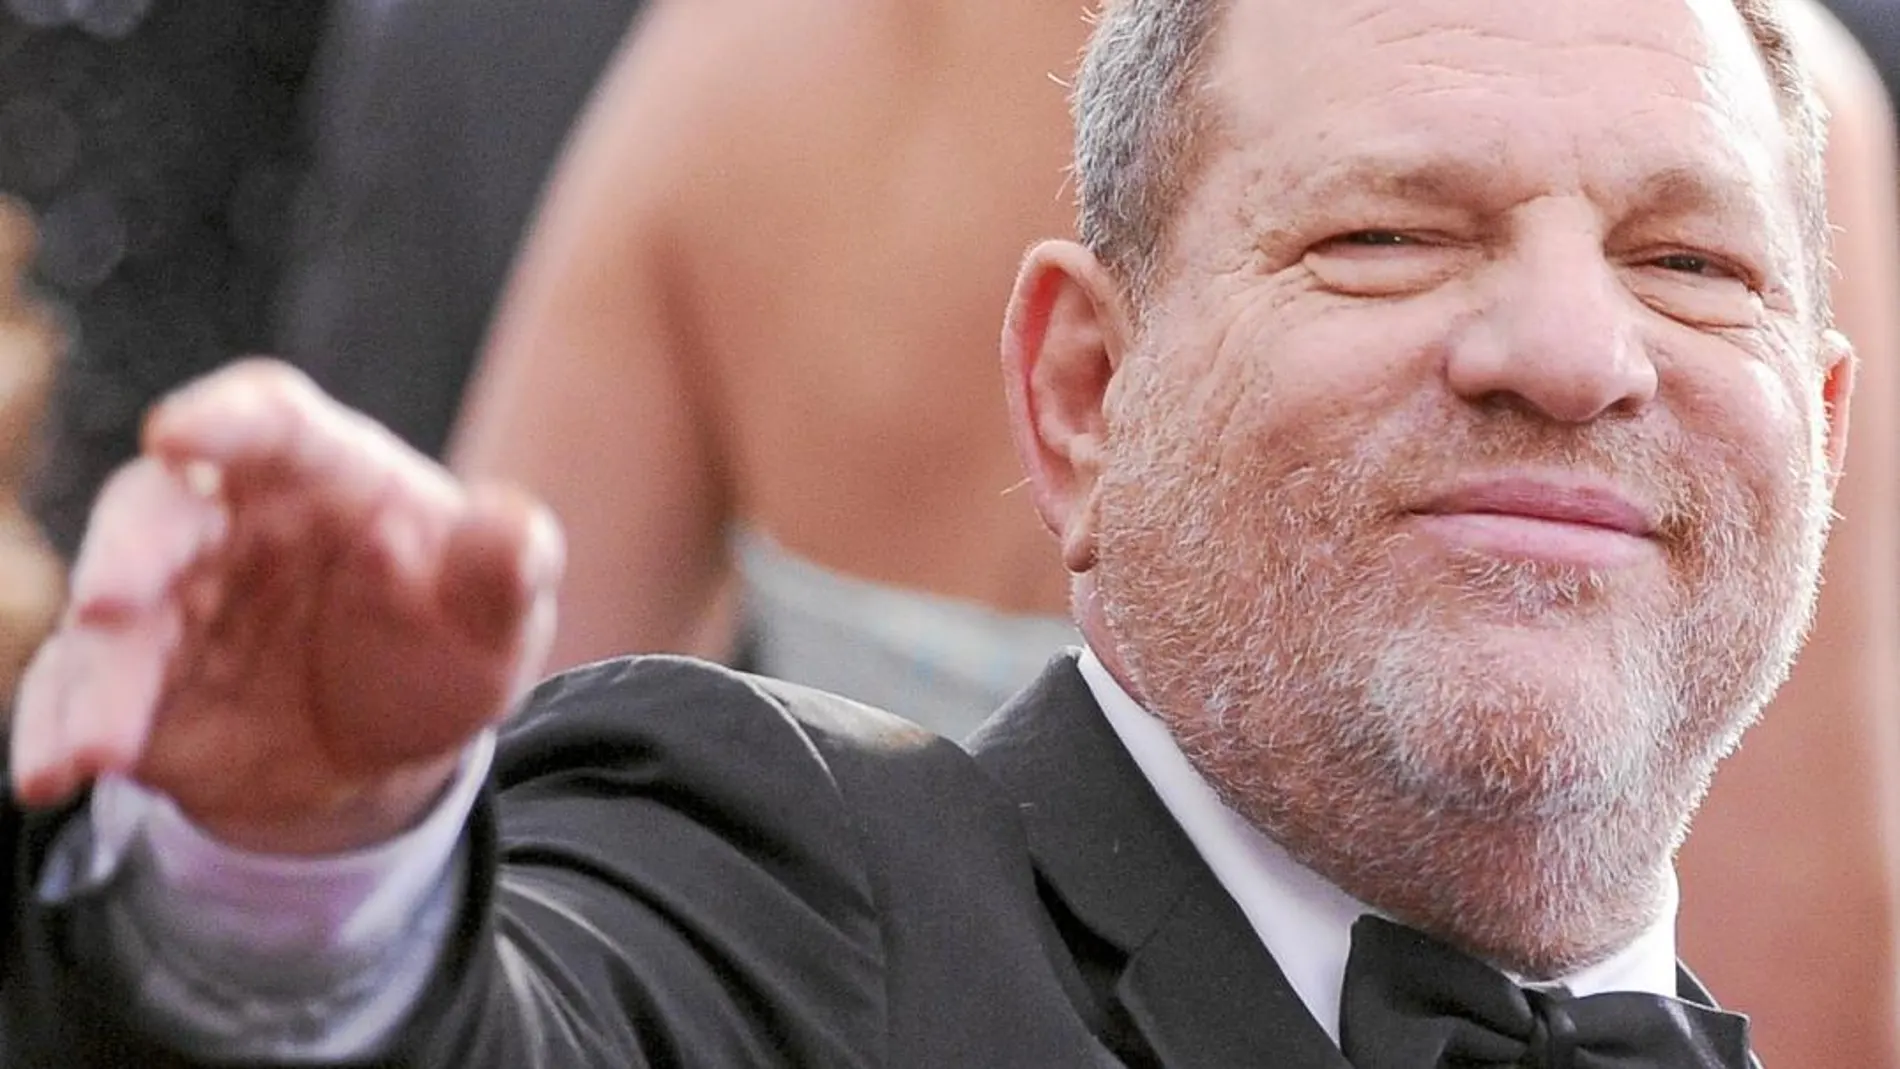 La oscura red que tapó a Weinstein